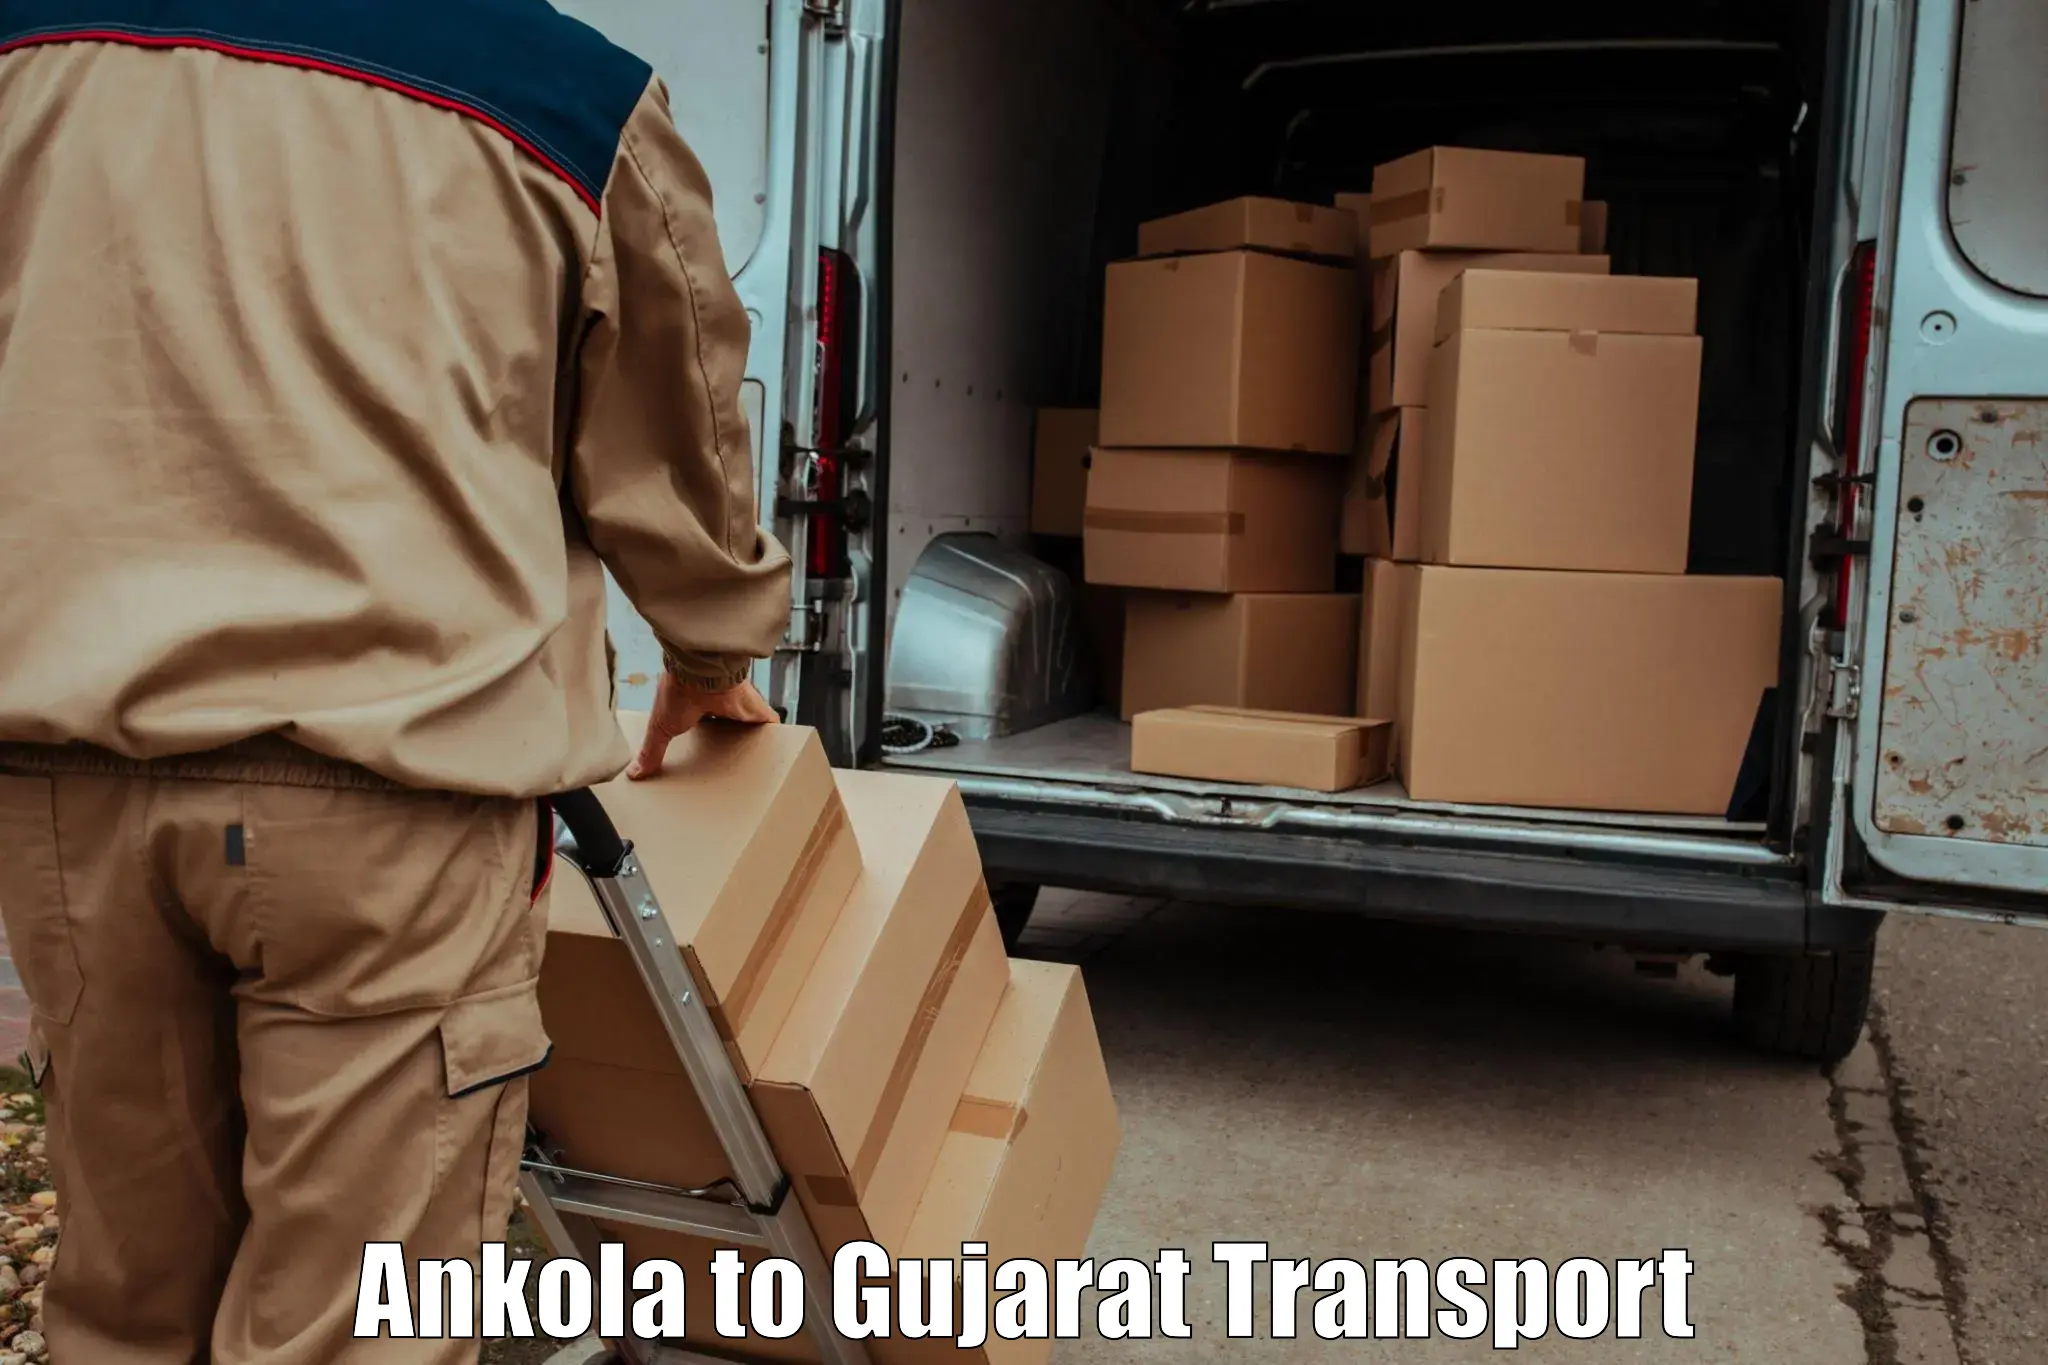 Truck transport companies in India Ankola to Veraval